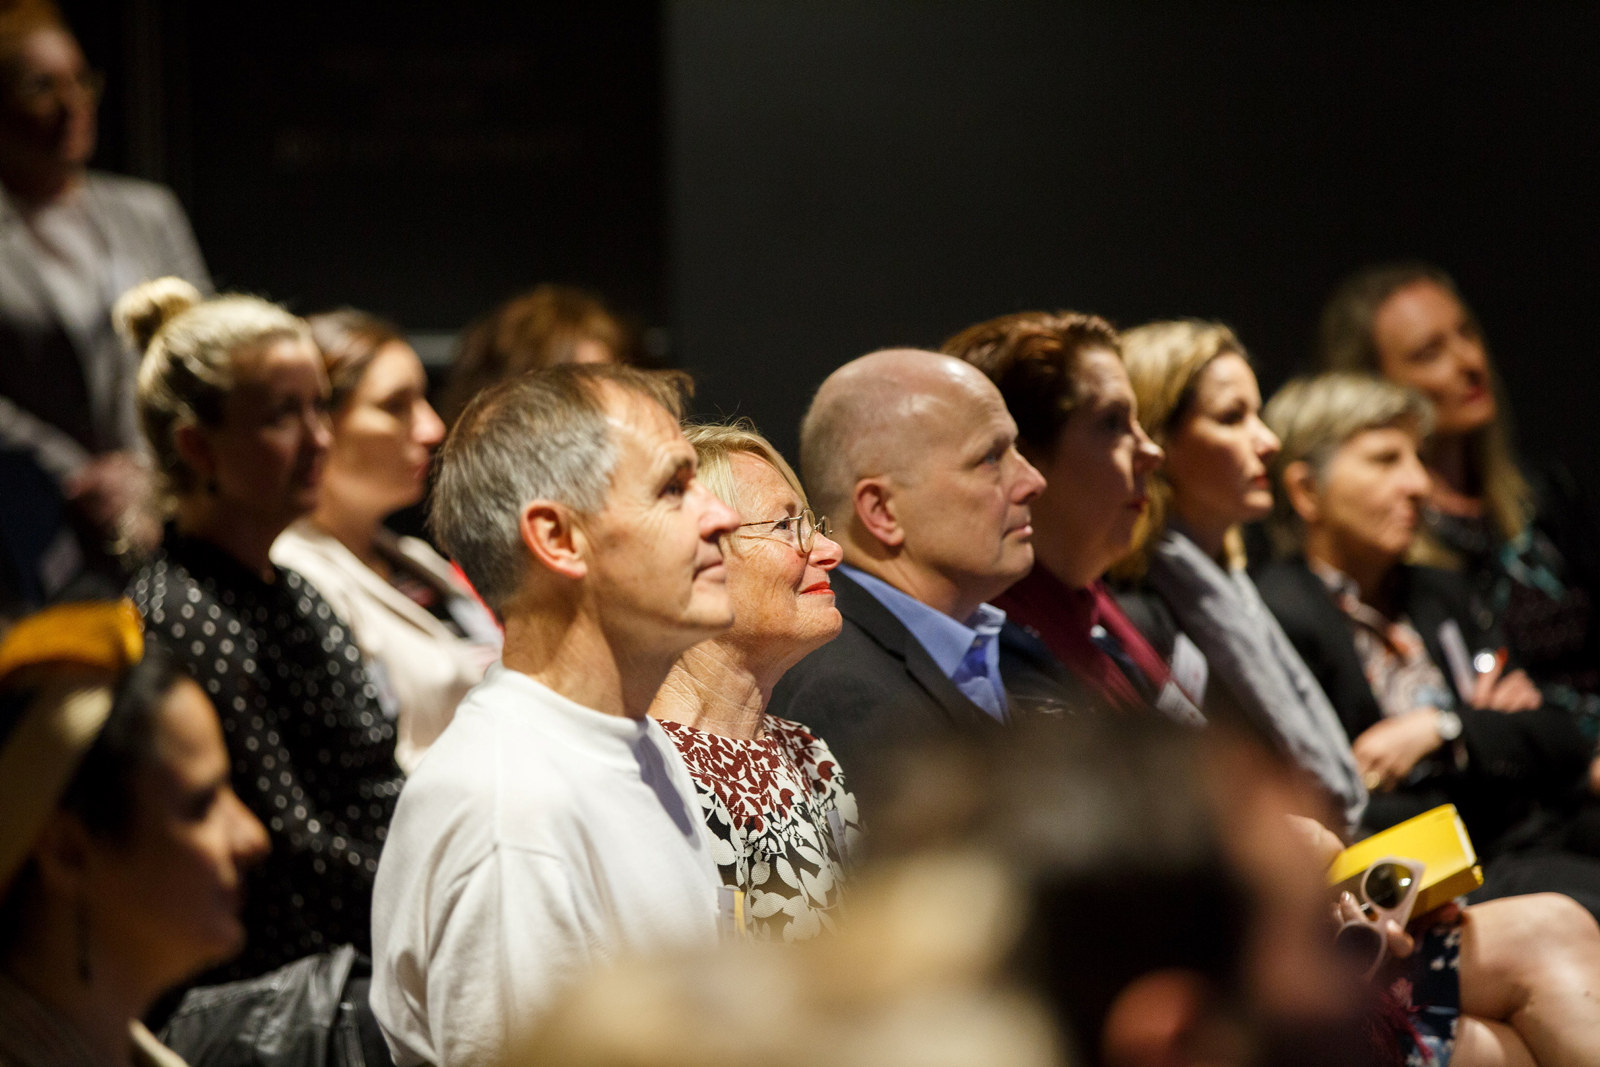 Guests at the launch of Sydney Open 2018 listening to speakers Dr Caroline Butler Bowden, Director of Strategy and Engagement at Sydney Living Museums and Lisa Davies, Editor of the Sydney Morning Herald in the Gold Melting Room at the Mint